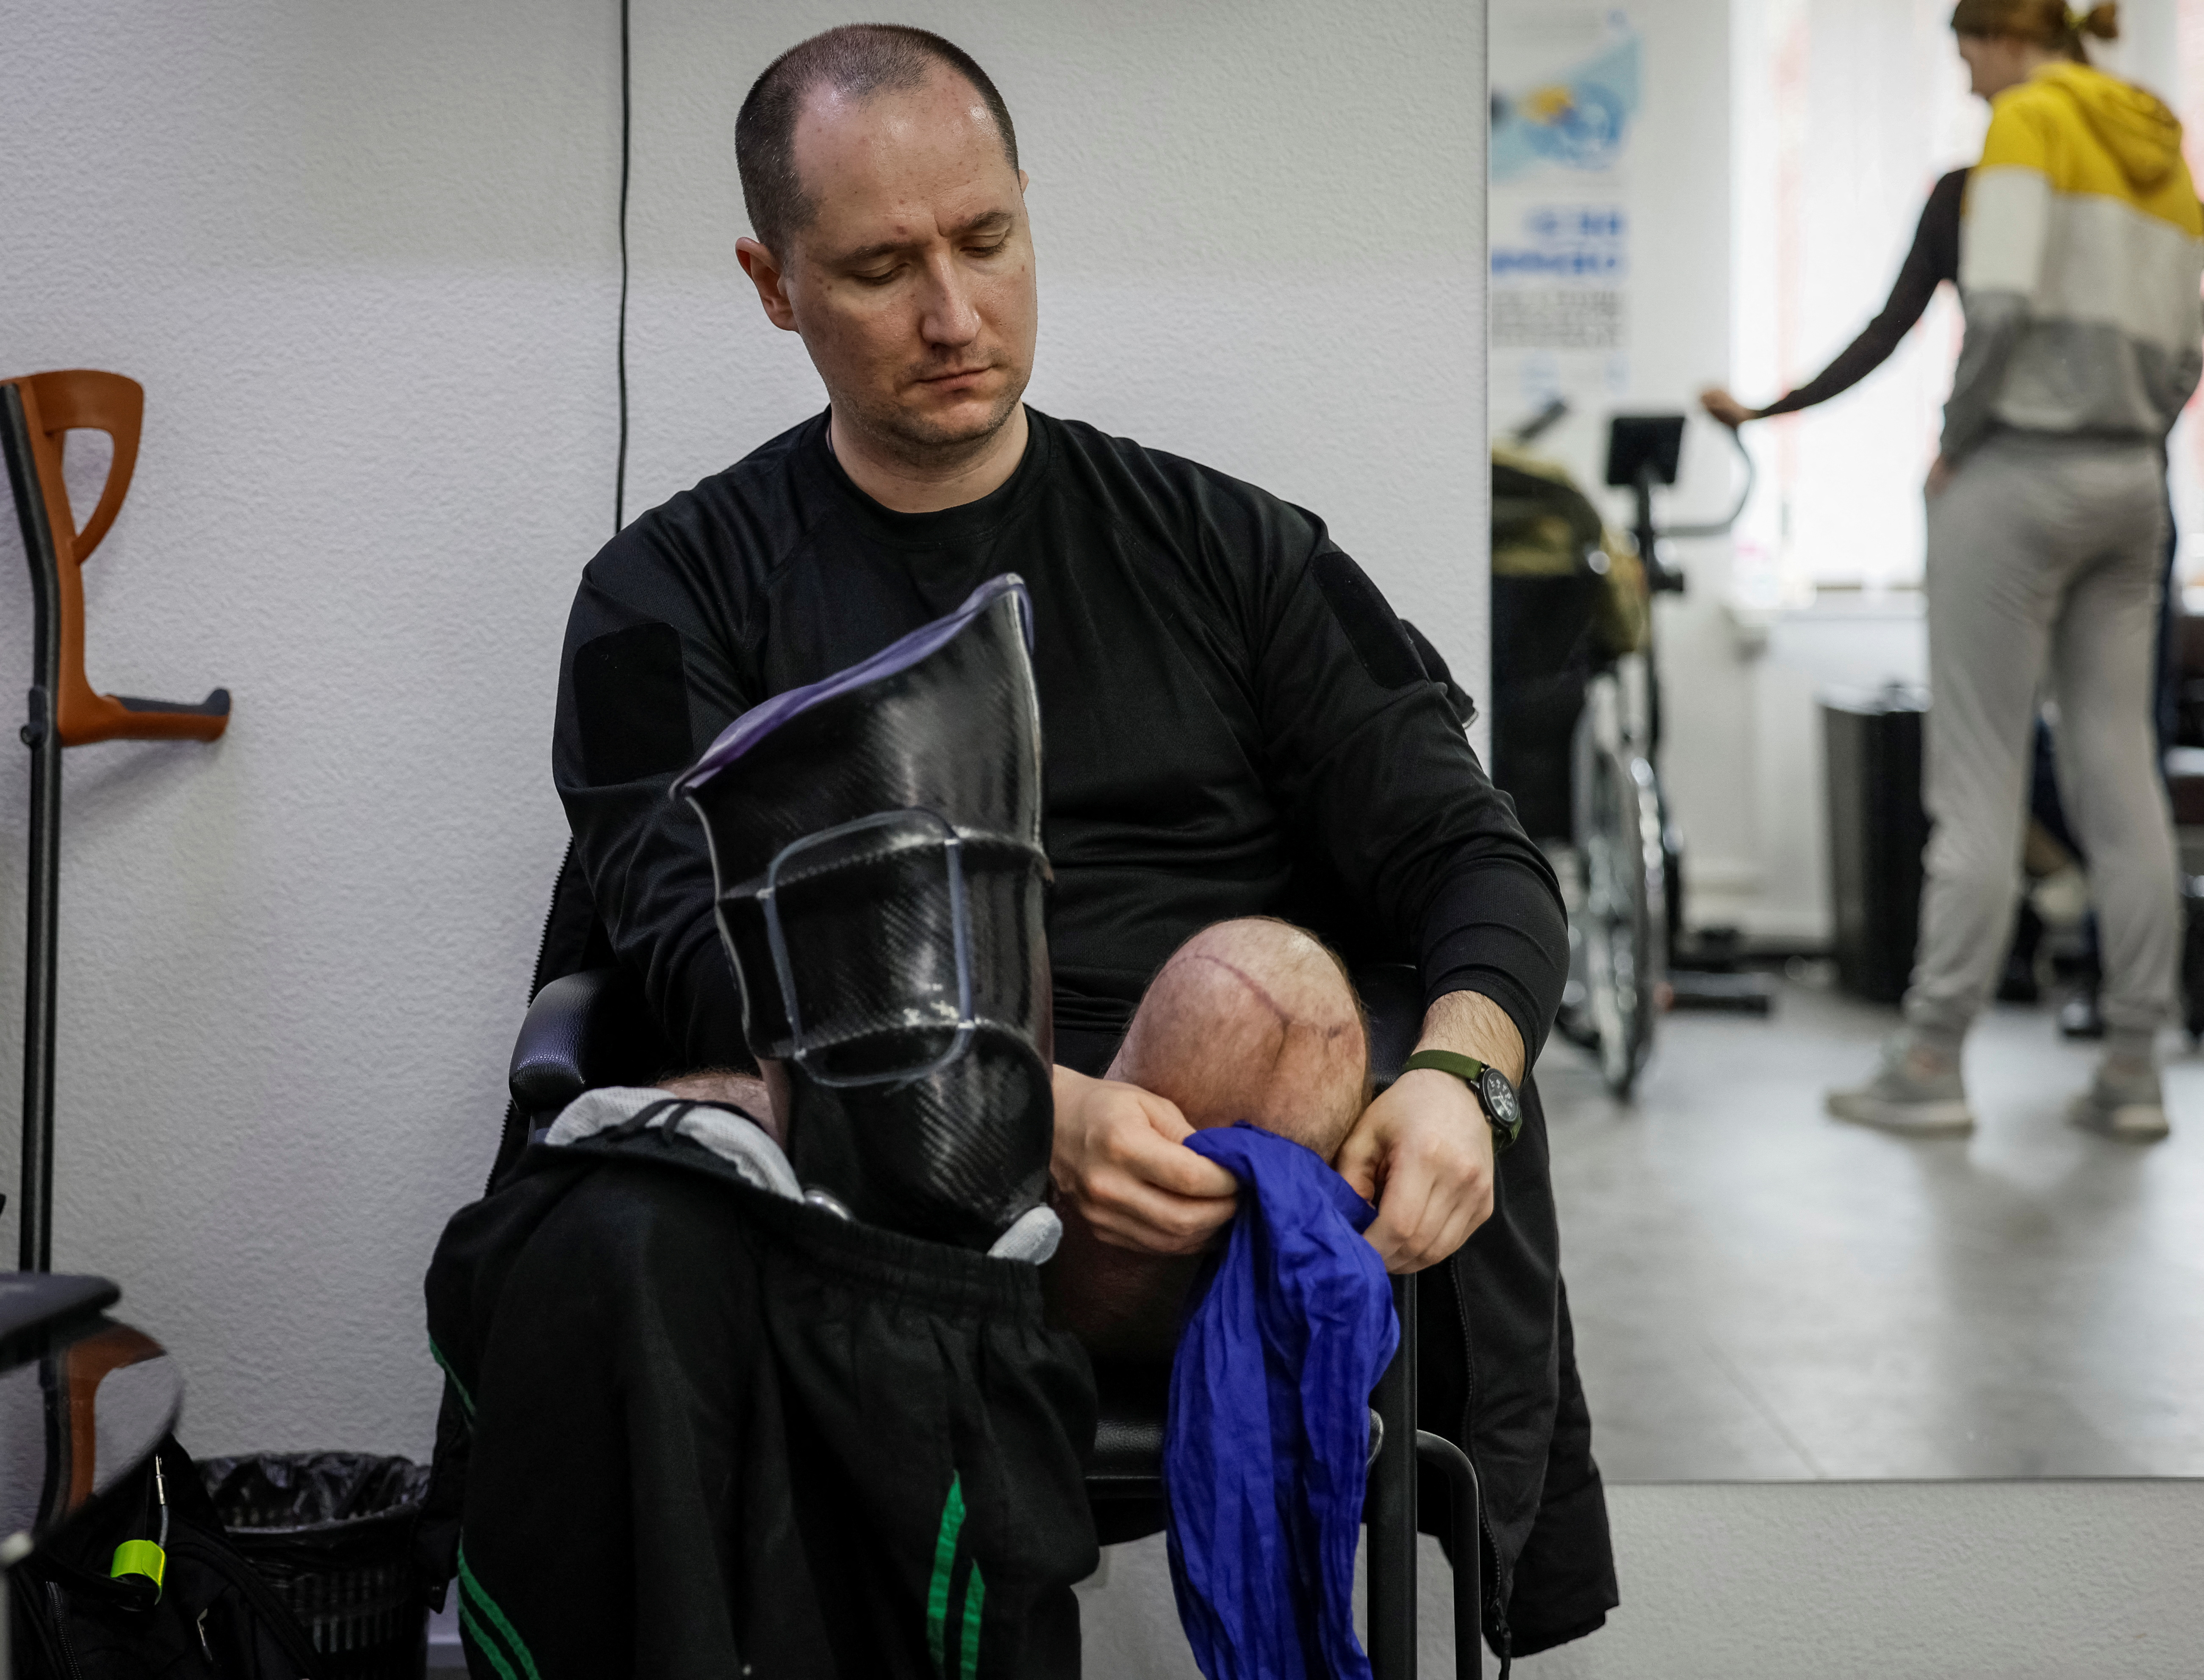 A patient of a prosthetics clinic, who lost his leg in the war, prepares to try on his prosthesis after fitting it in the clinic in Kyiv